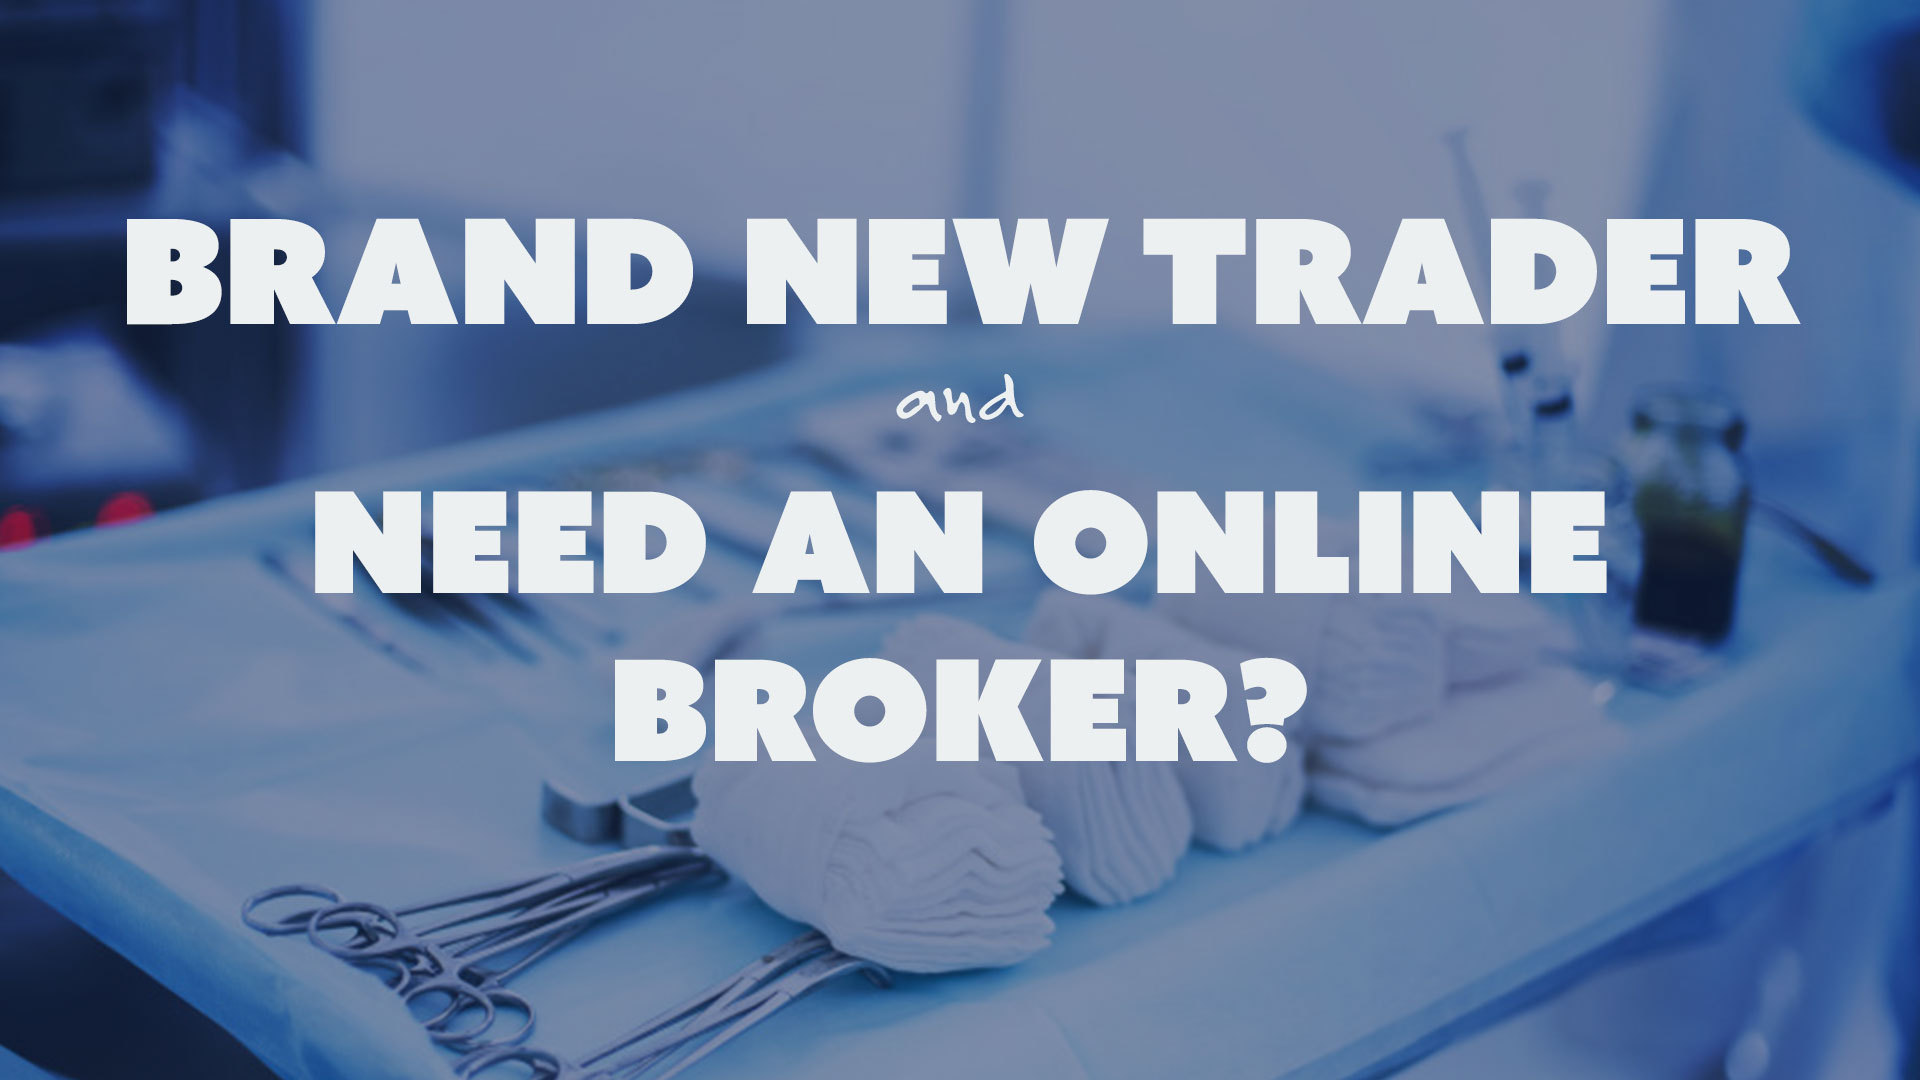 Brand New Trader and Need an Online Broker?